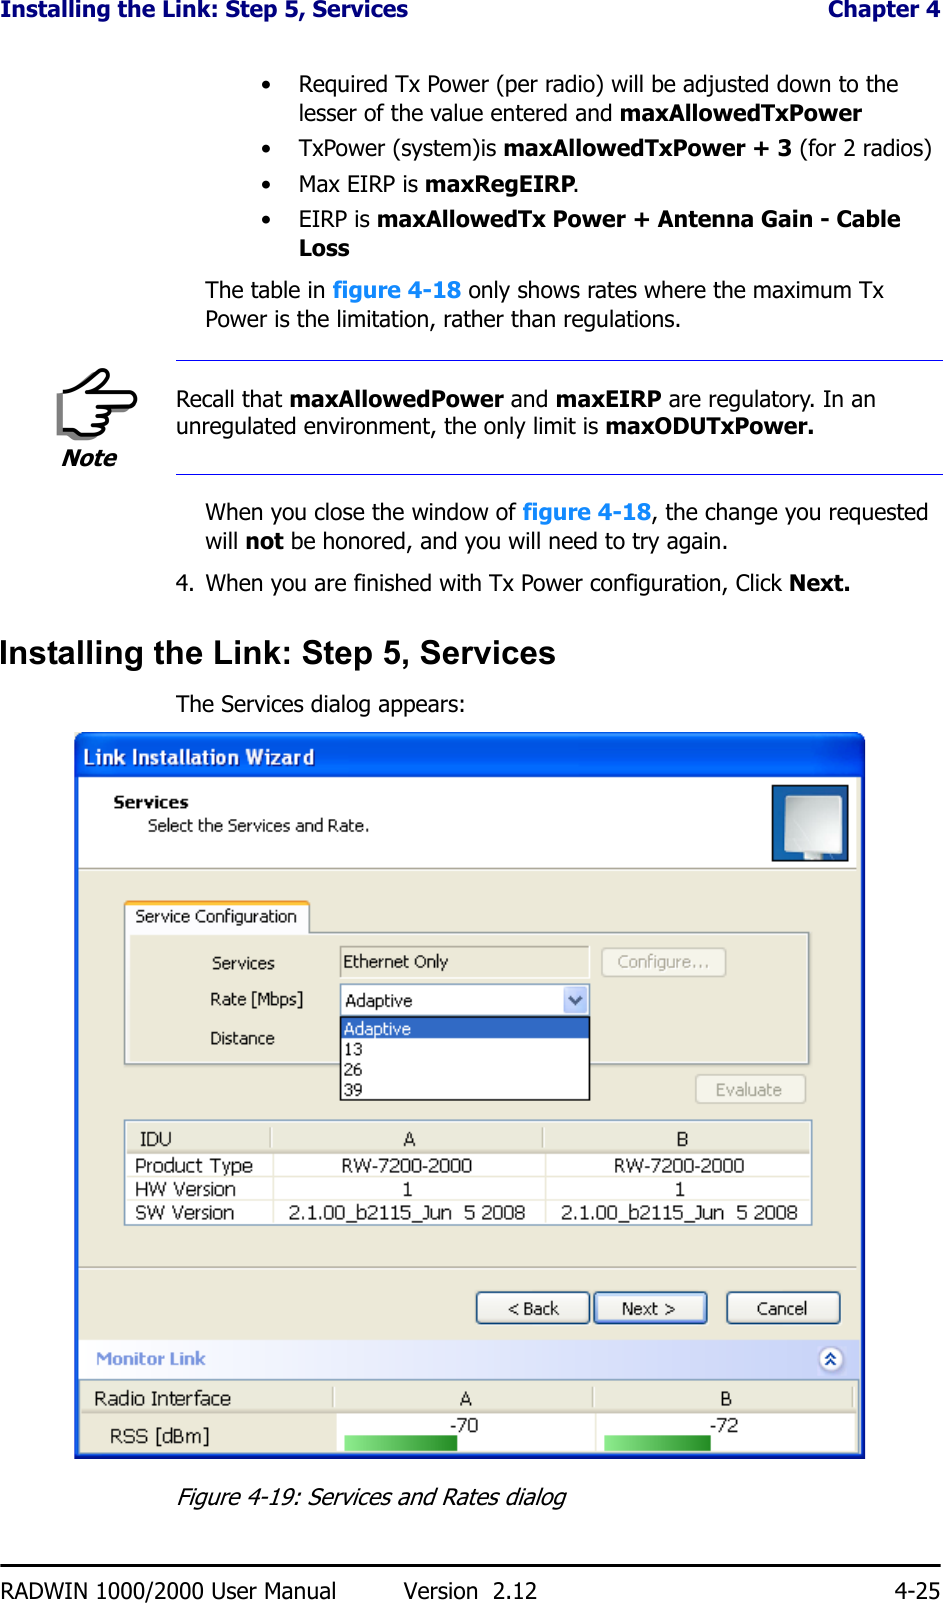 Installing the Link: Step 5, Services  Chapter 4RADWIN 1000/2000 User Manual Version  2.12 4-25• Required Tx Power (per radio) will be adjusted down to the lesser of the value entered and maxAllowedTxPower•TxPower (system)is maxAllowedTxPower + 3 (for 2 radios)•Max EIRP is maxRegEIRP.•EIRP is maxAllowedTx Power + Antenna Gain - Cable LossThe table in figure 4-18 only shows rates where the maximum Tx Power is the limitation, rather than regulations.When you close the window of figure 4-18, the change you requested will not be honored, and you will need to try again.4. When you are finished with Tx Power configuration, Click Next.Installing the Link: Step 5, ServicesThe Services dialog appears:Figure 4-19: Services and Rates dialogNoteRecall that maxAllowedPower and maxEIRP are regulatory. In an unregulated environment, the only limit is maxODUTxPower.